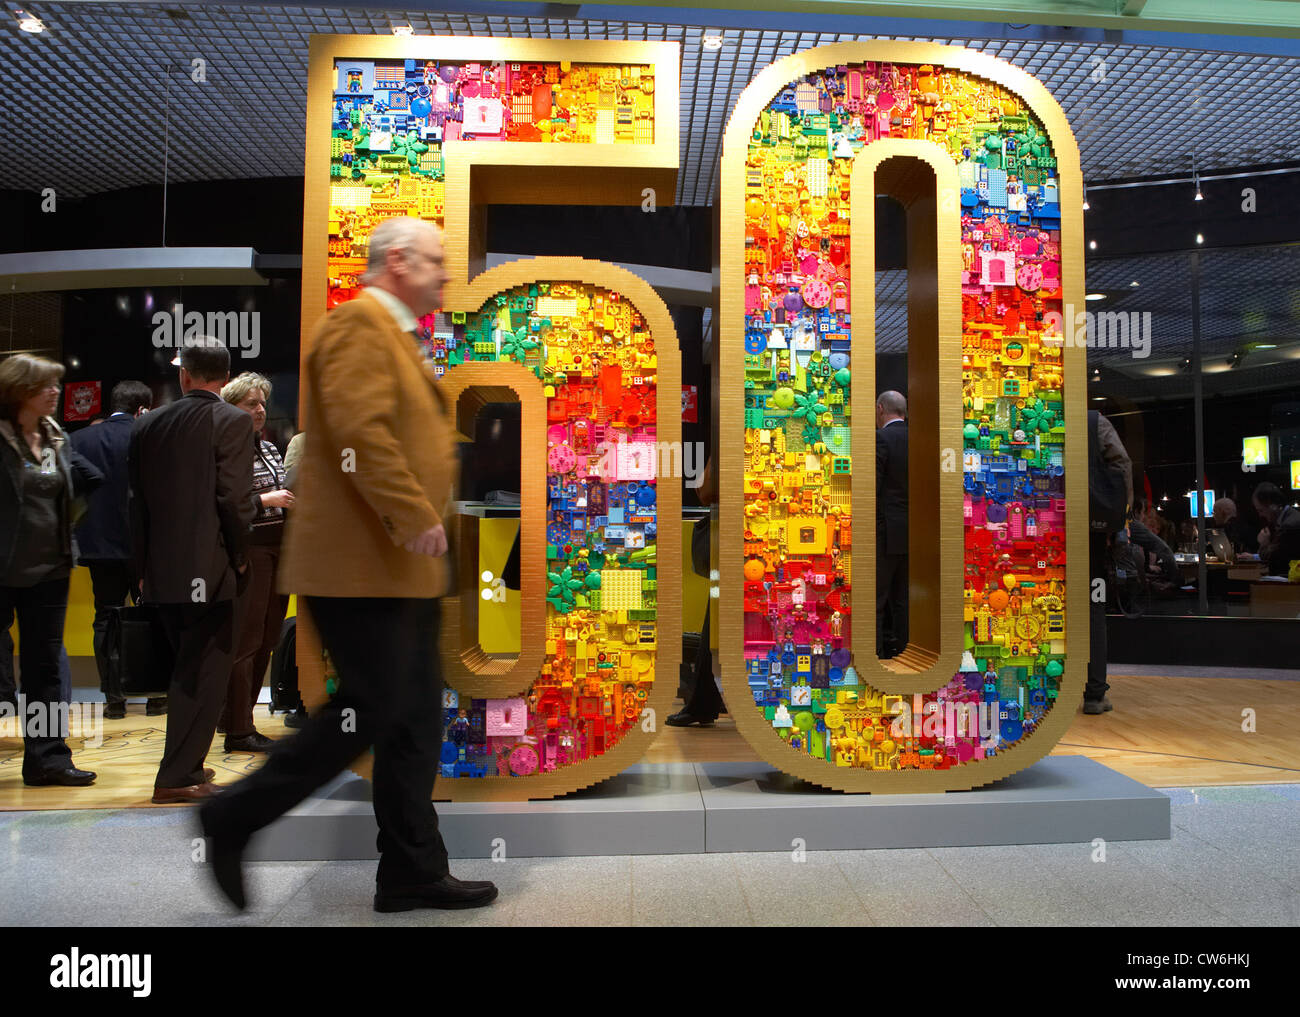 Nuernberg - Lego booth at the International Toy Fair Stock Photo - Alamy